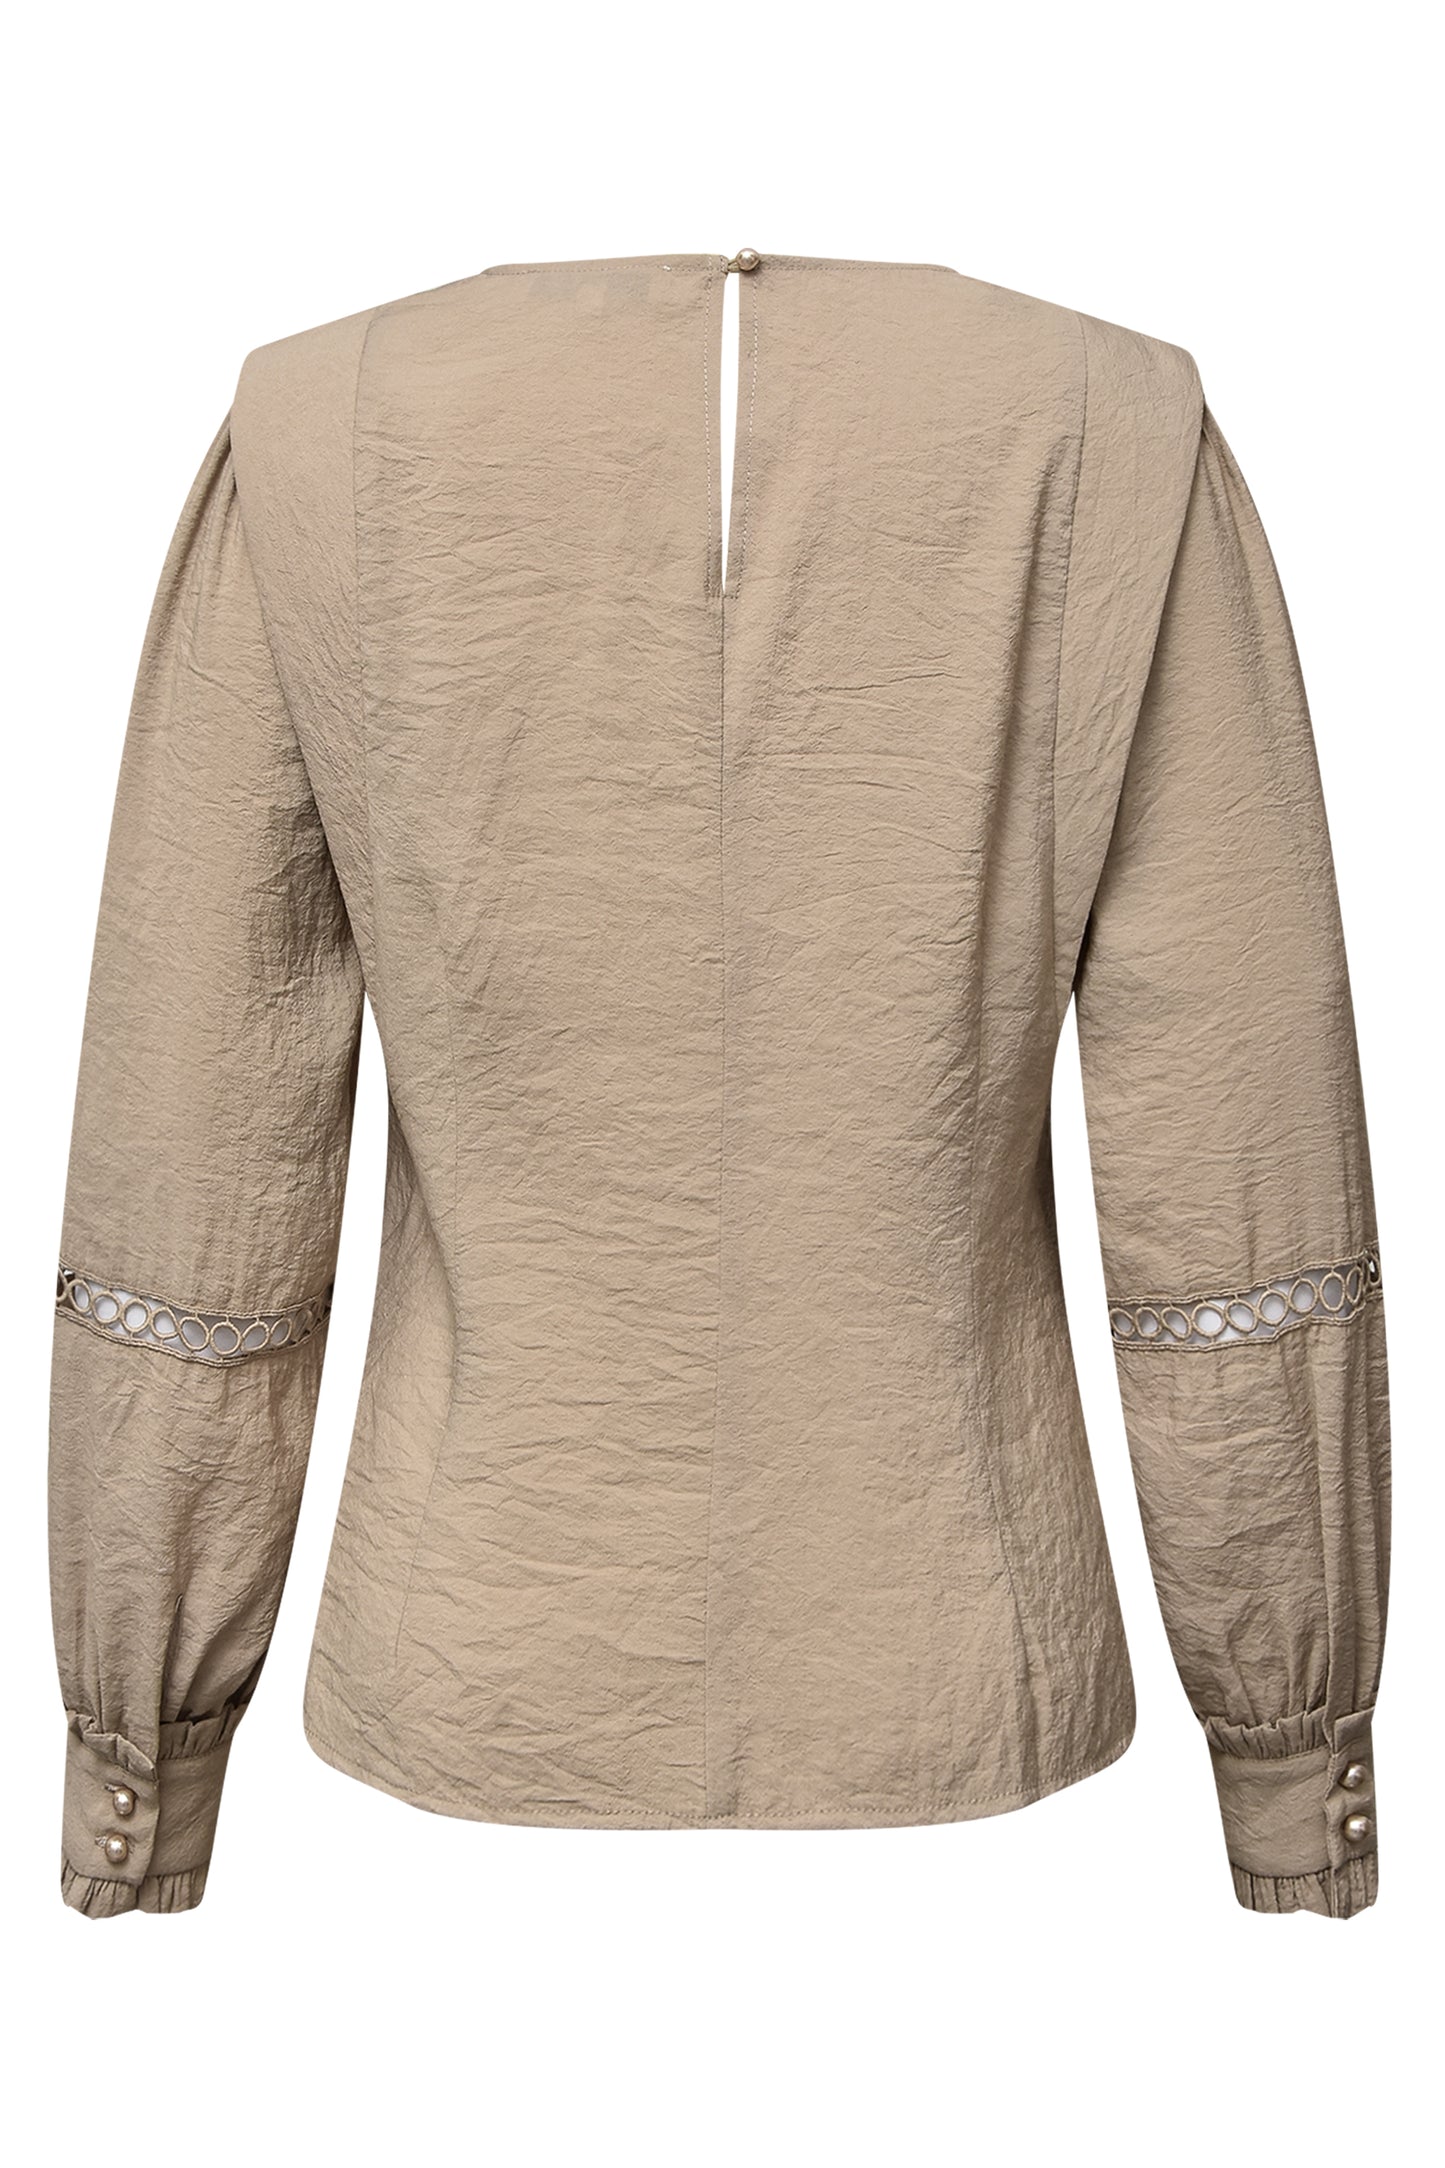 A-VIEW - Sissi blouse - Sand